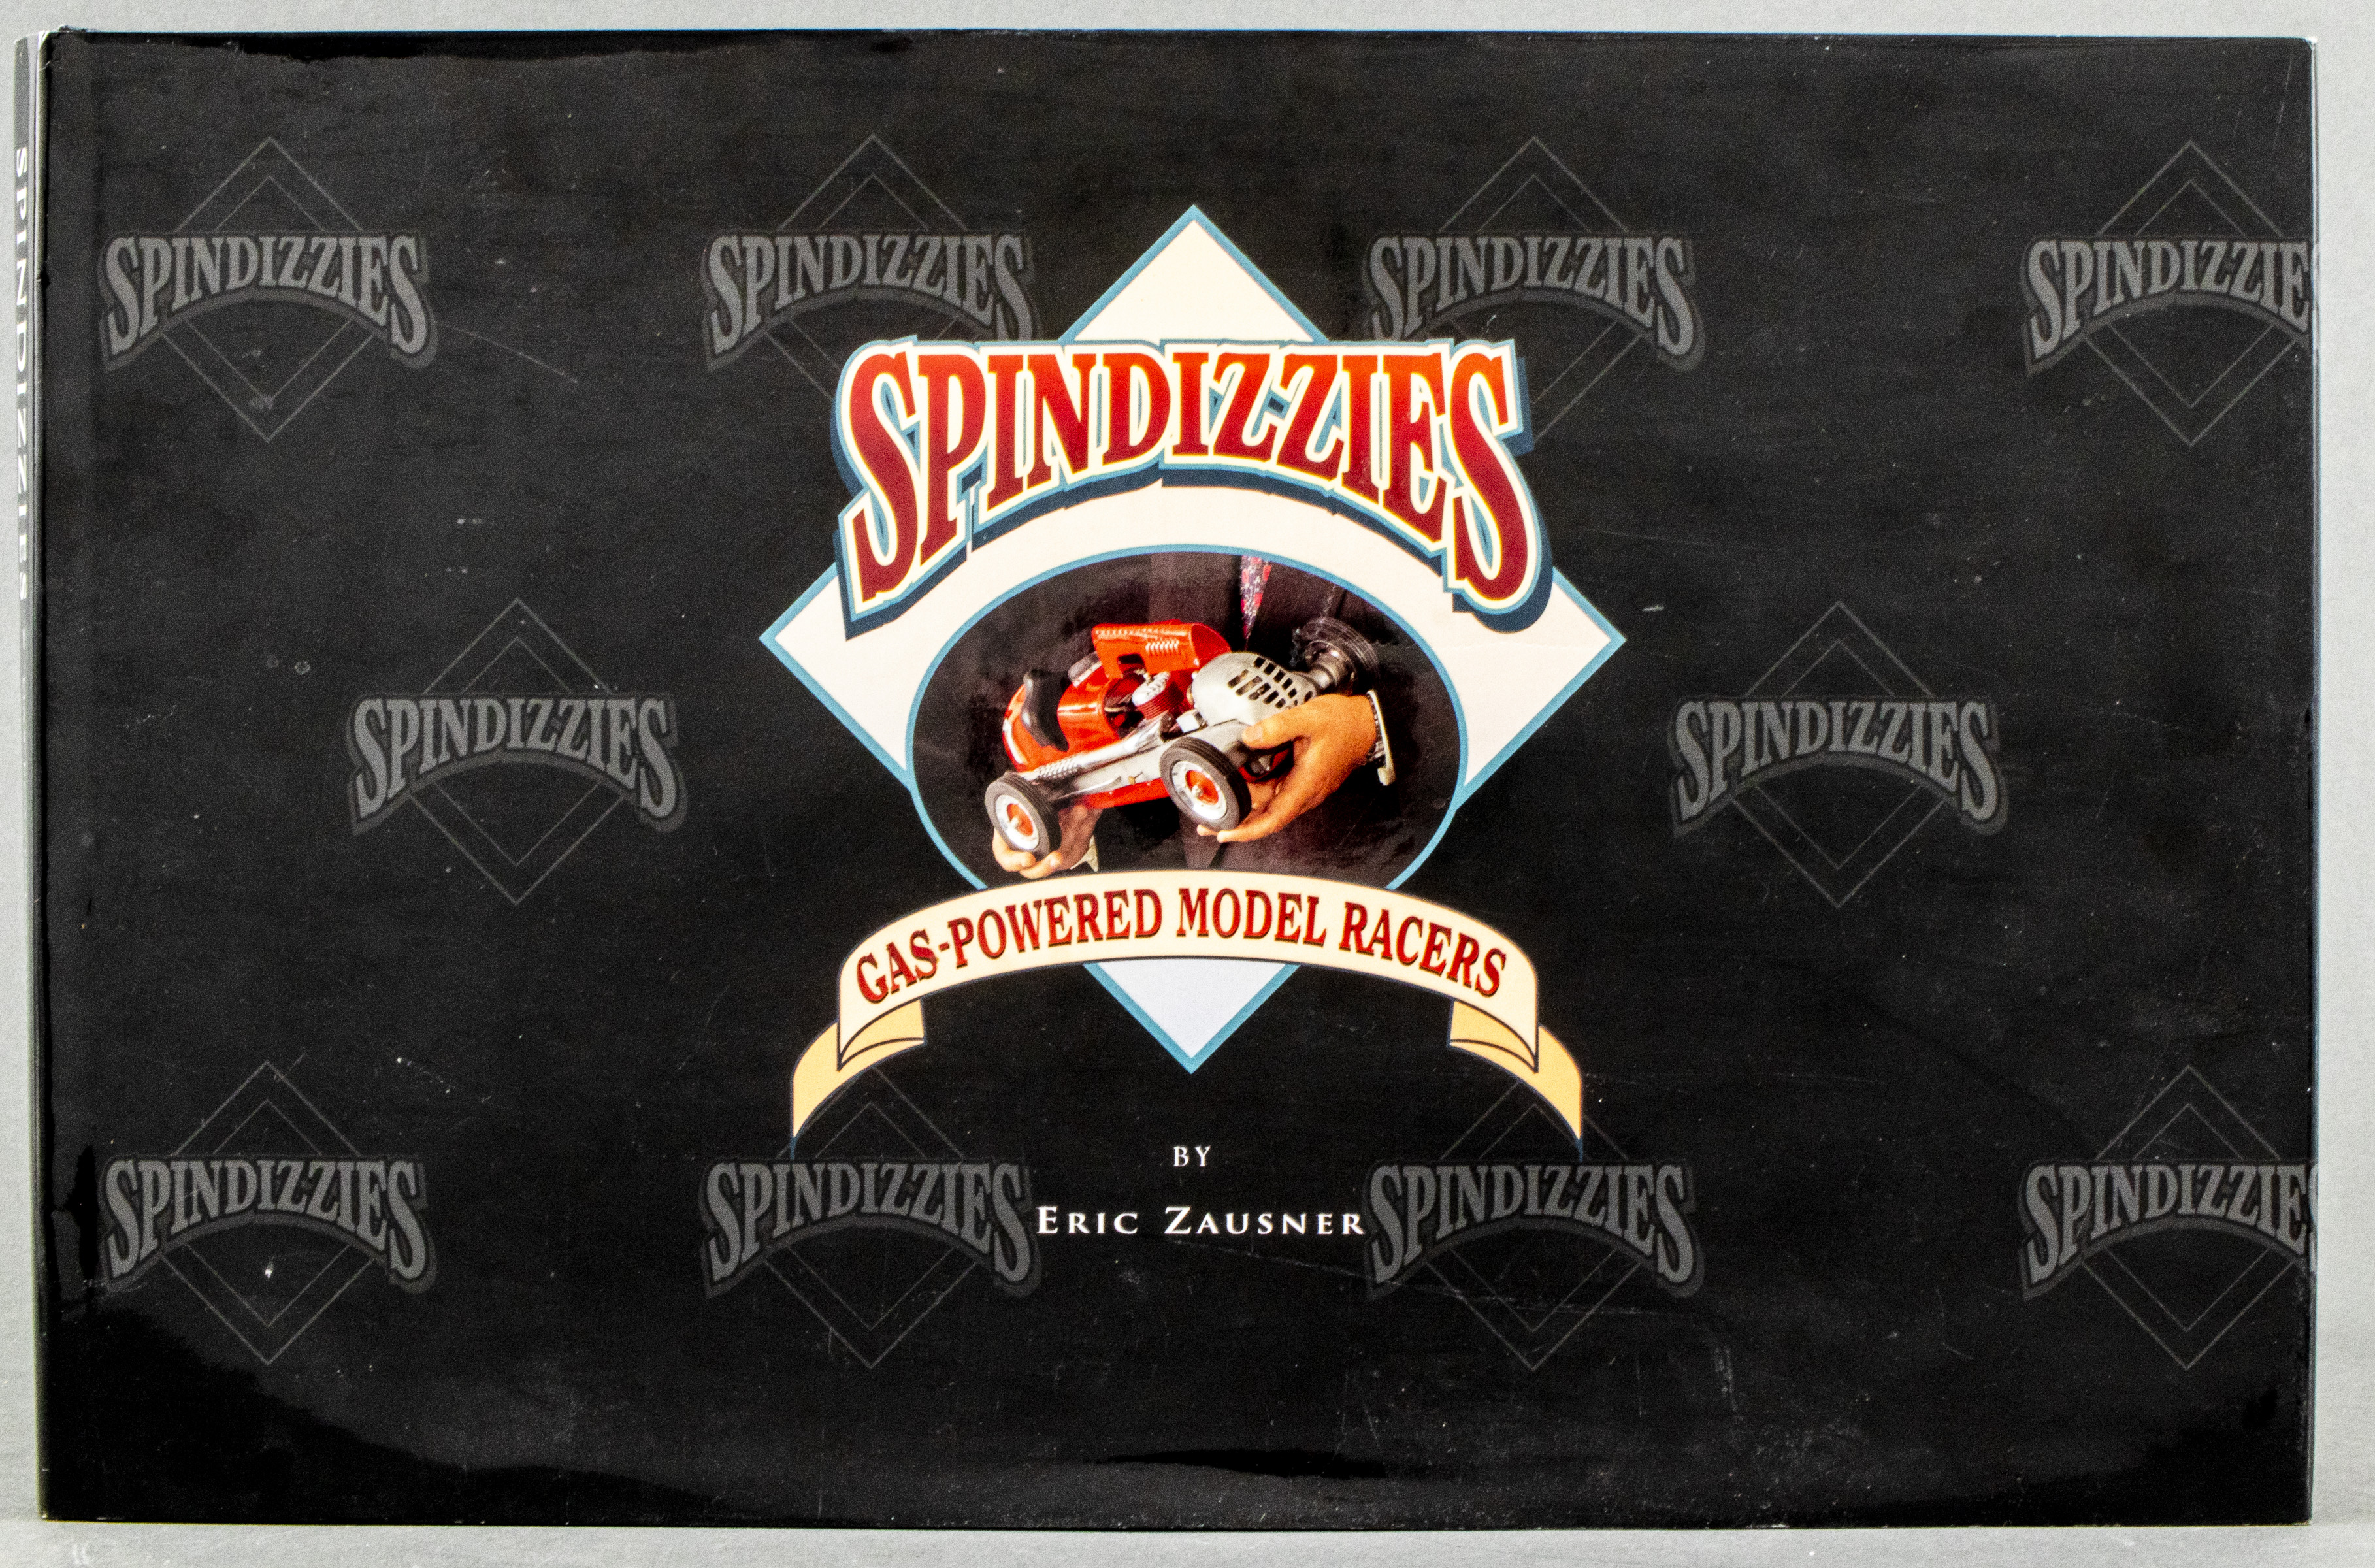 SPINDIZZIES GAS POWERED MODEL RACERS,